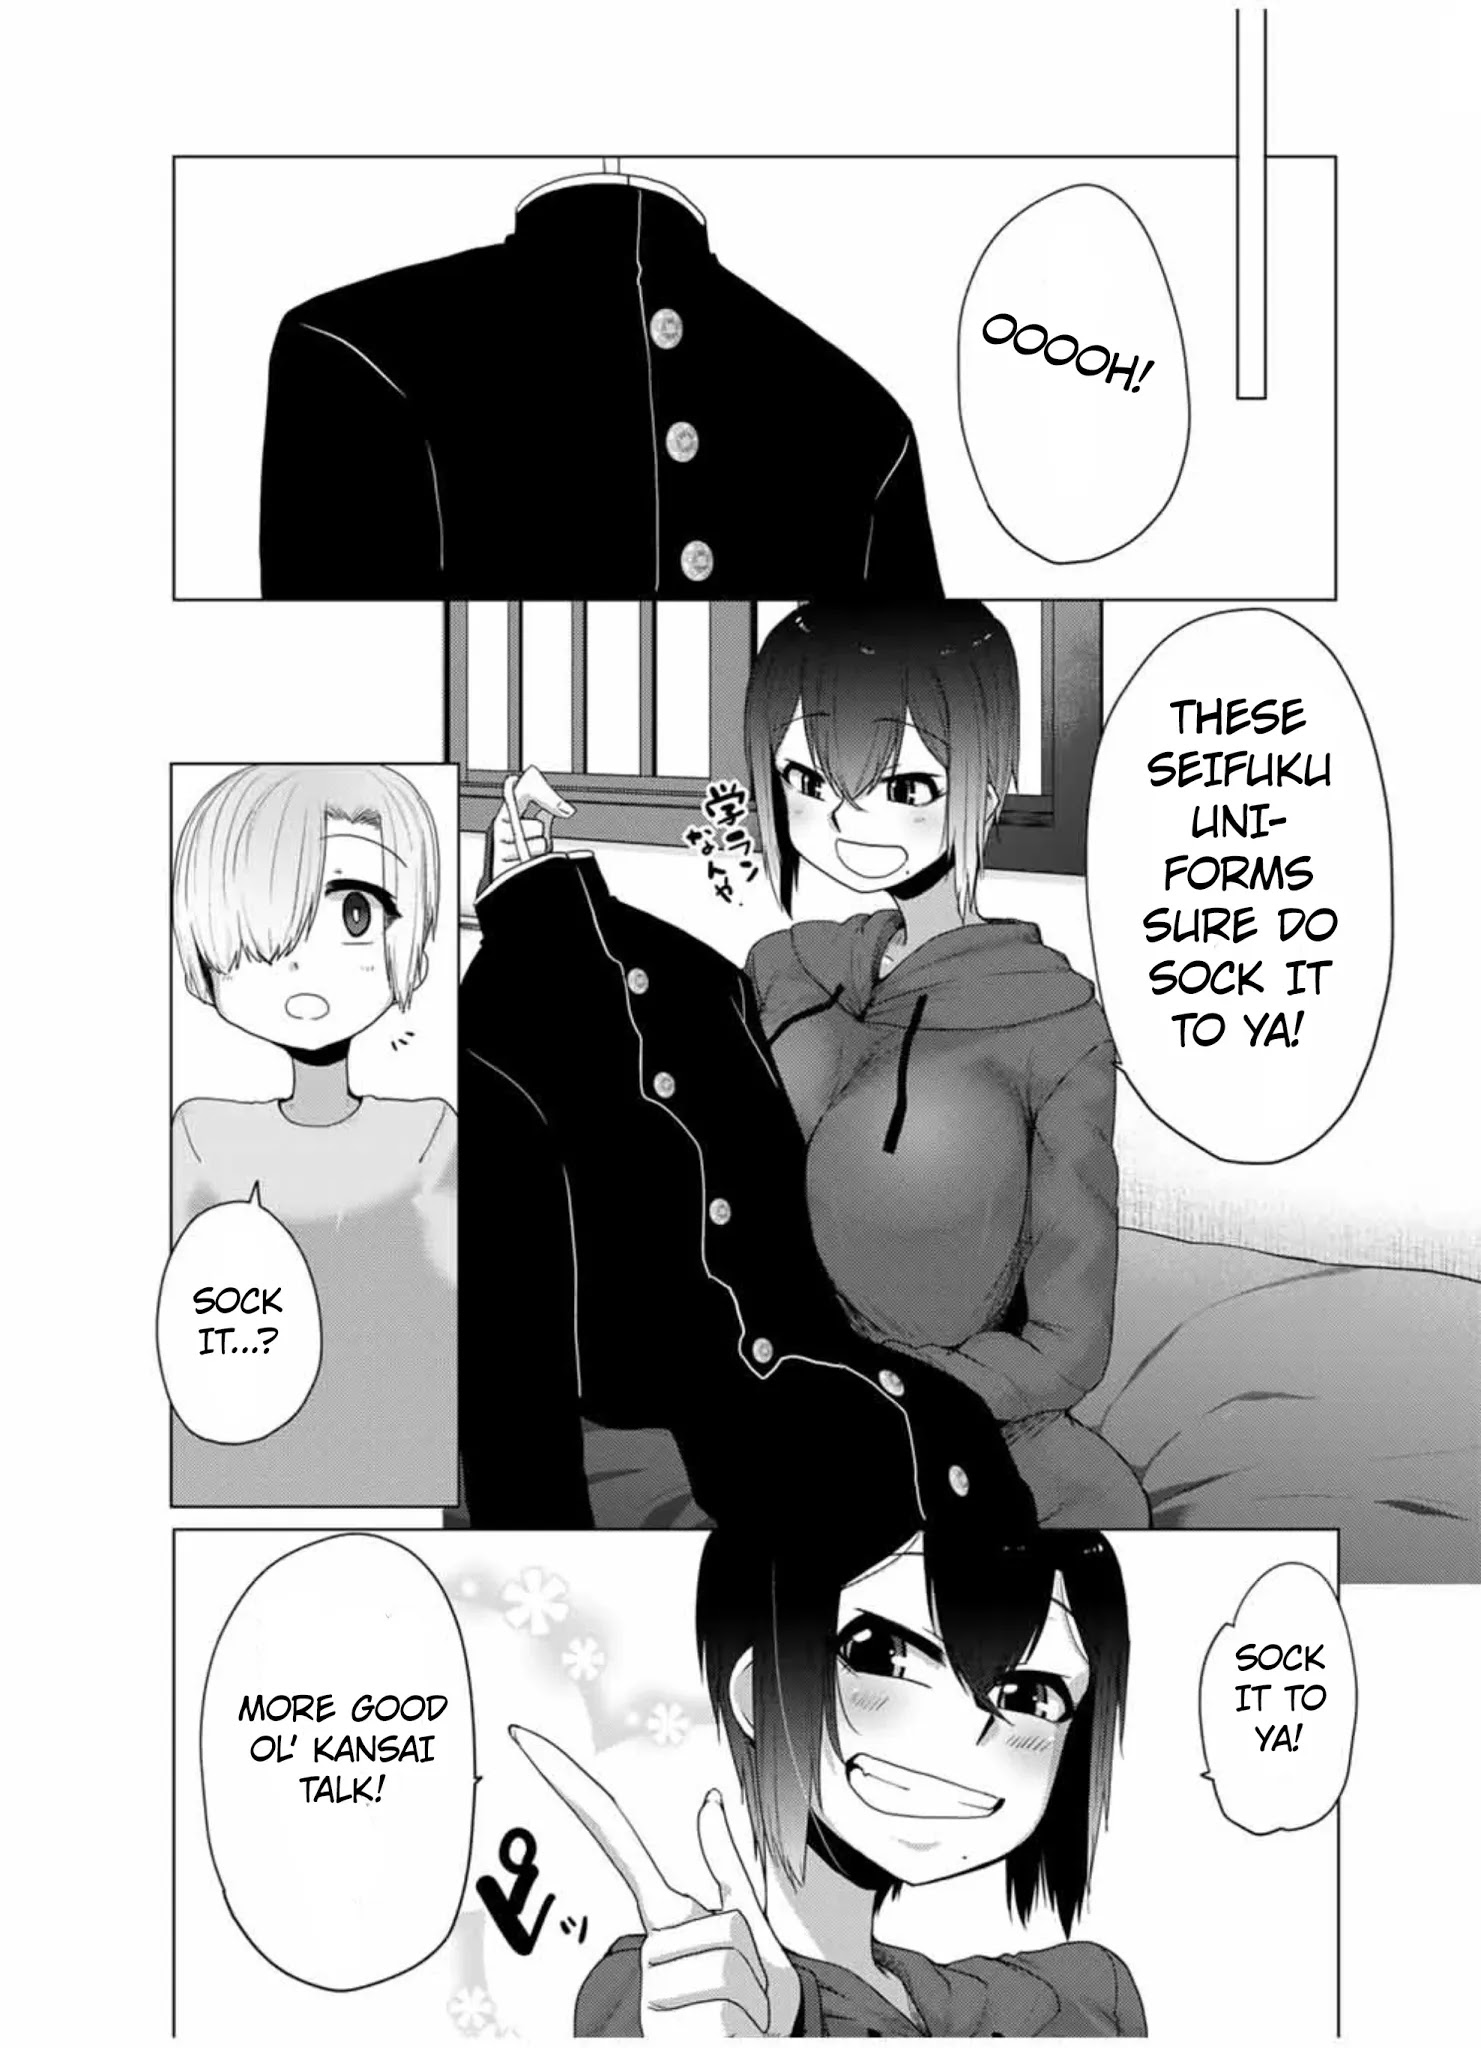 The Girl with a Kansai Accent and the Pure Boy - Chapter 15 Page 2